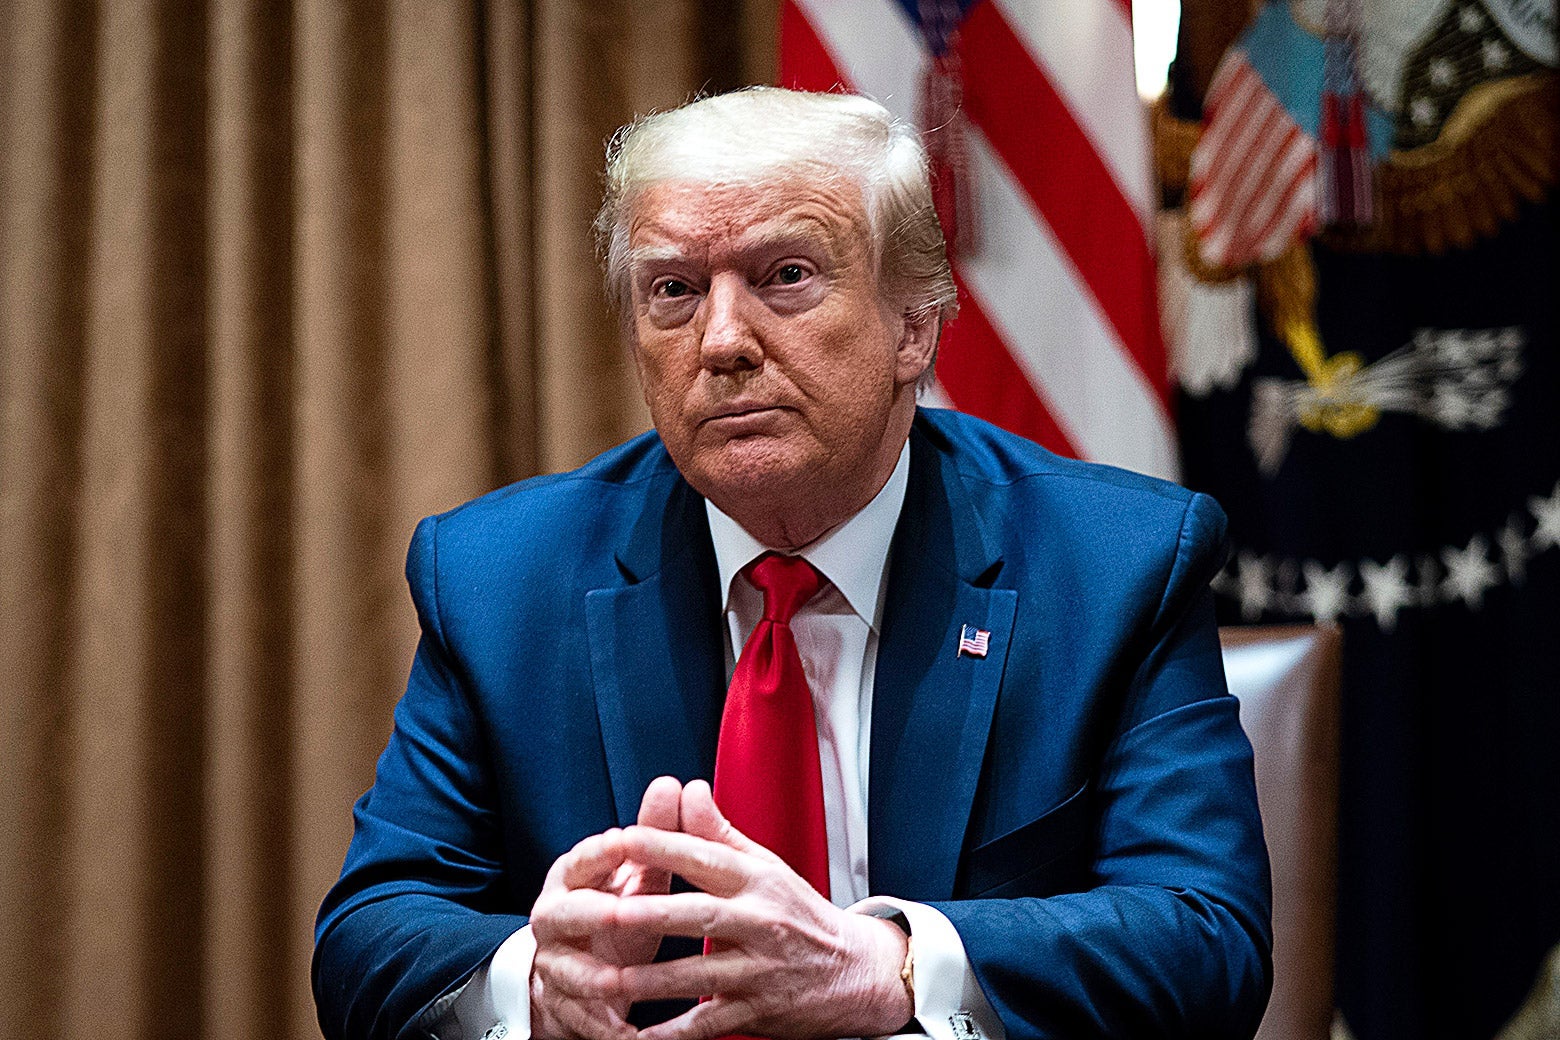 Donald Trump speaks during a roundtable discussion in the Cabinet Room of the White House on June 10, 2020.